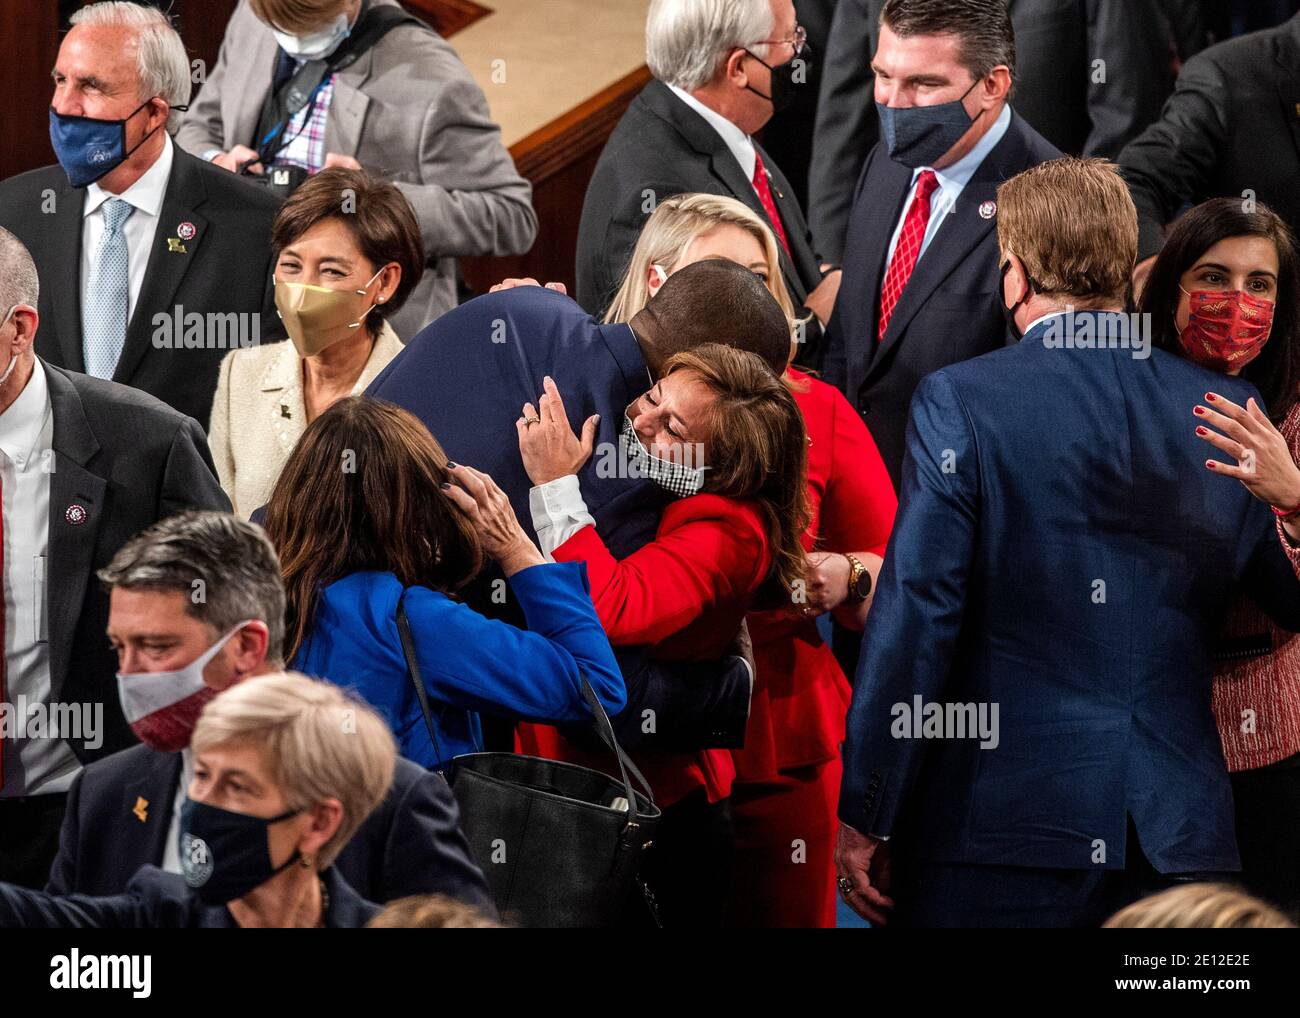 Washington, United States Of America. 03rd Jan, 2021. Newly sworn in House members mingle and congratulate each other on the opening day of the 117th Congress at the at the U.S. Capitol in Washington, DC on January 03, 2021. Credit: Bill O'Leary/Pool via CNP/dpa/Alamy Live News Stock Photo